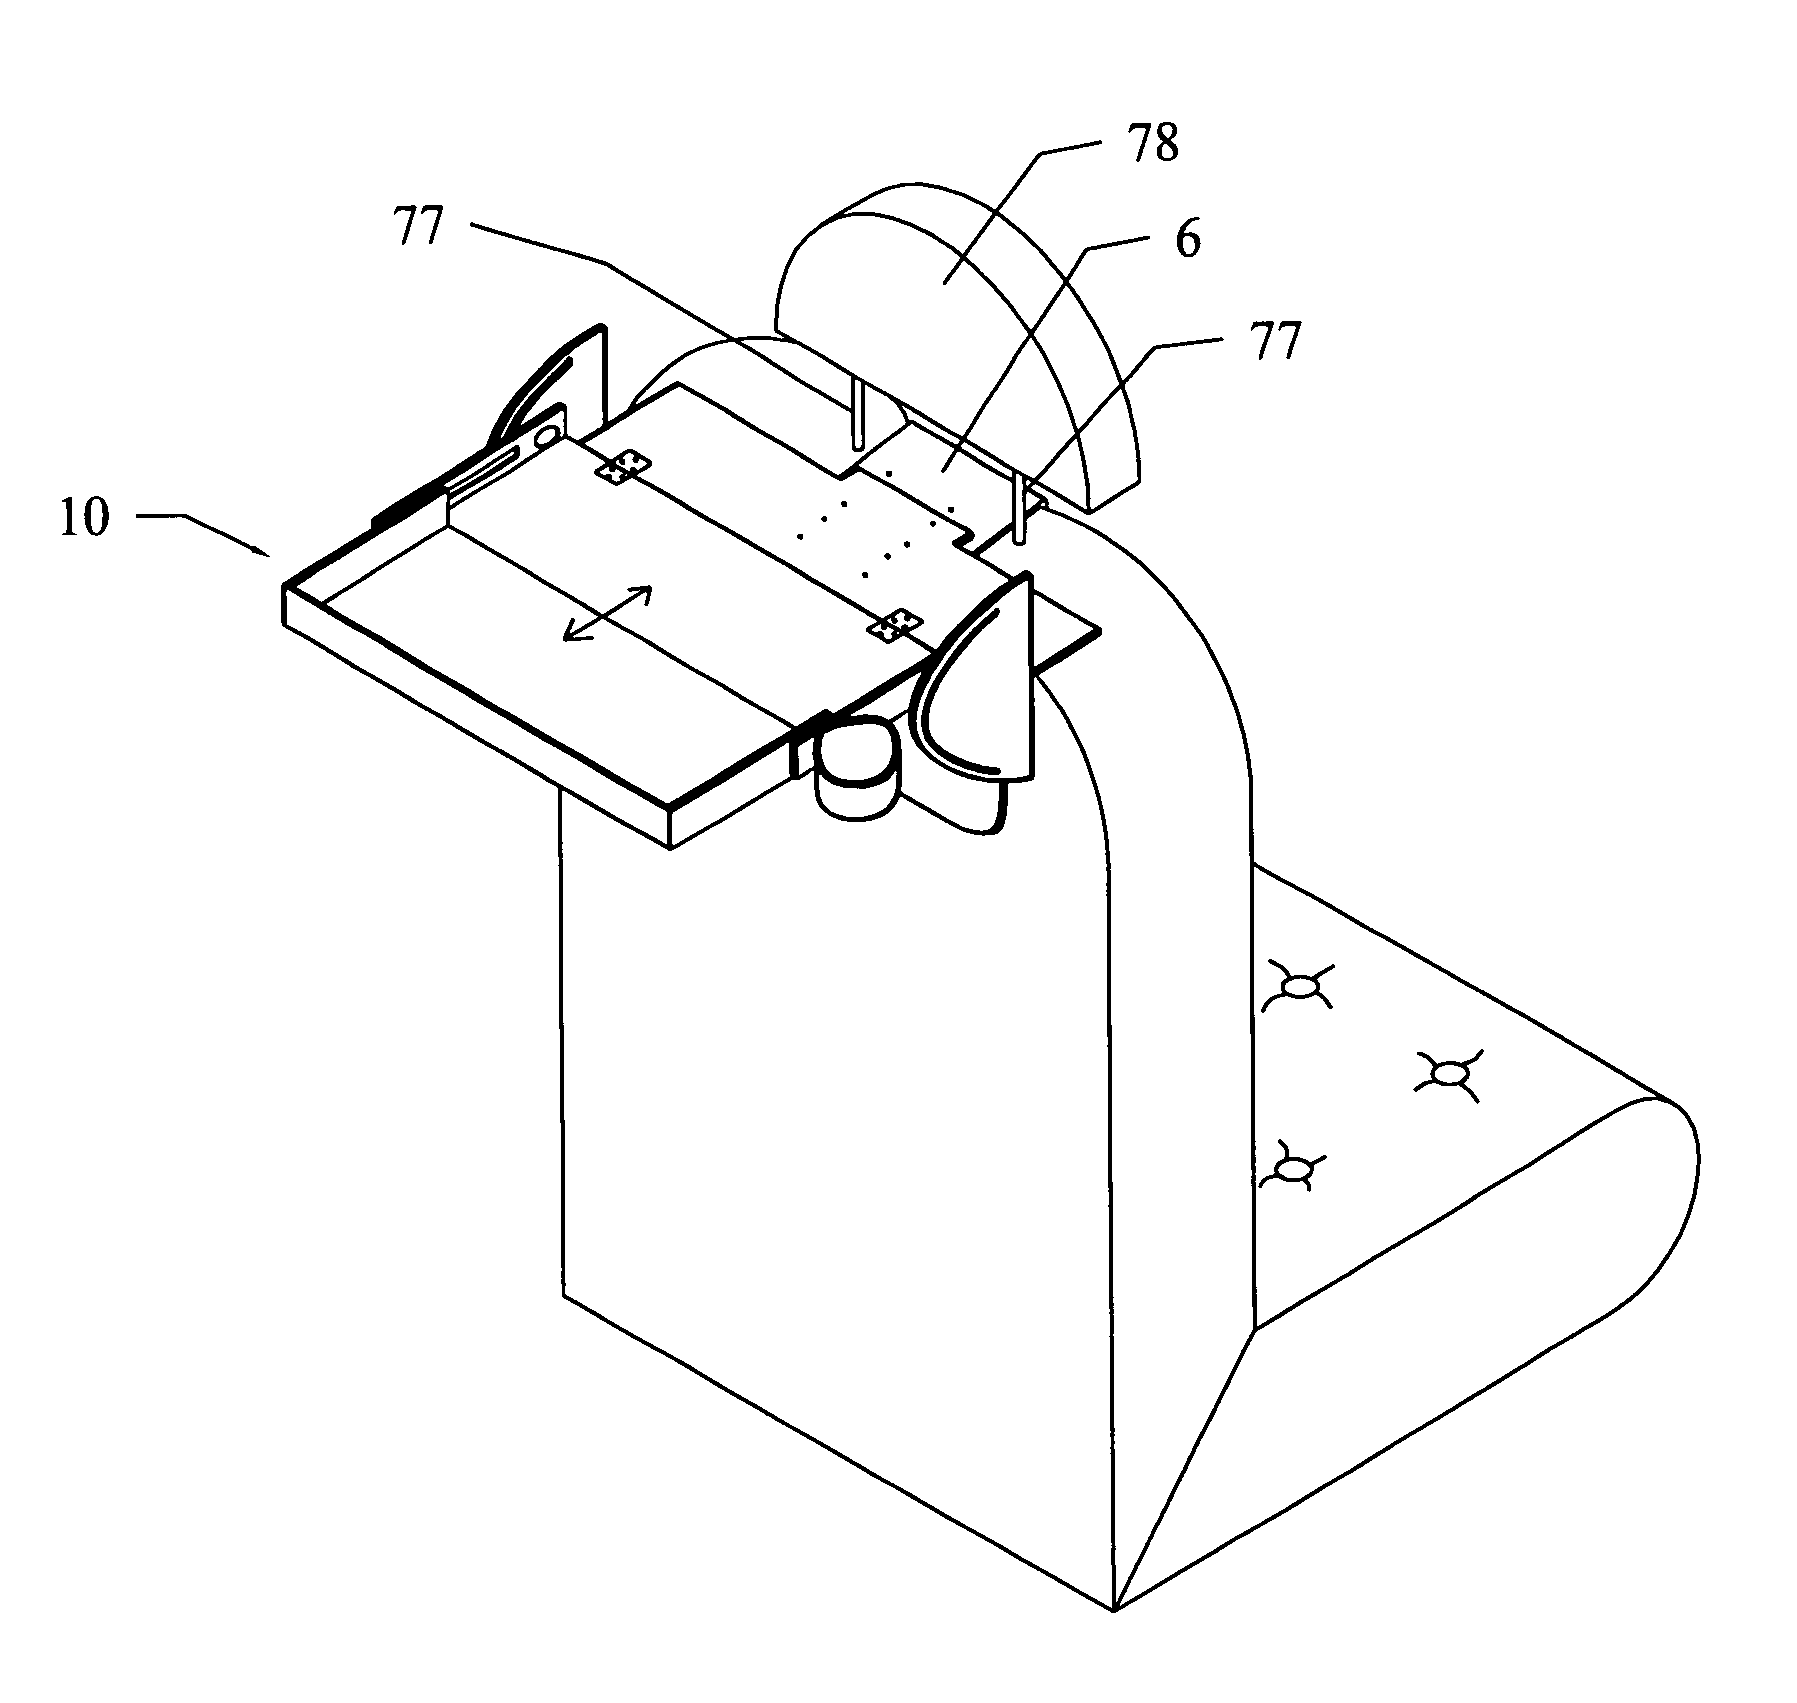 Portable platforms and methods of use